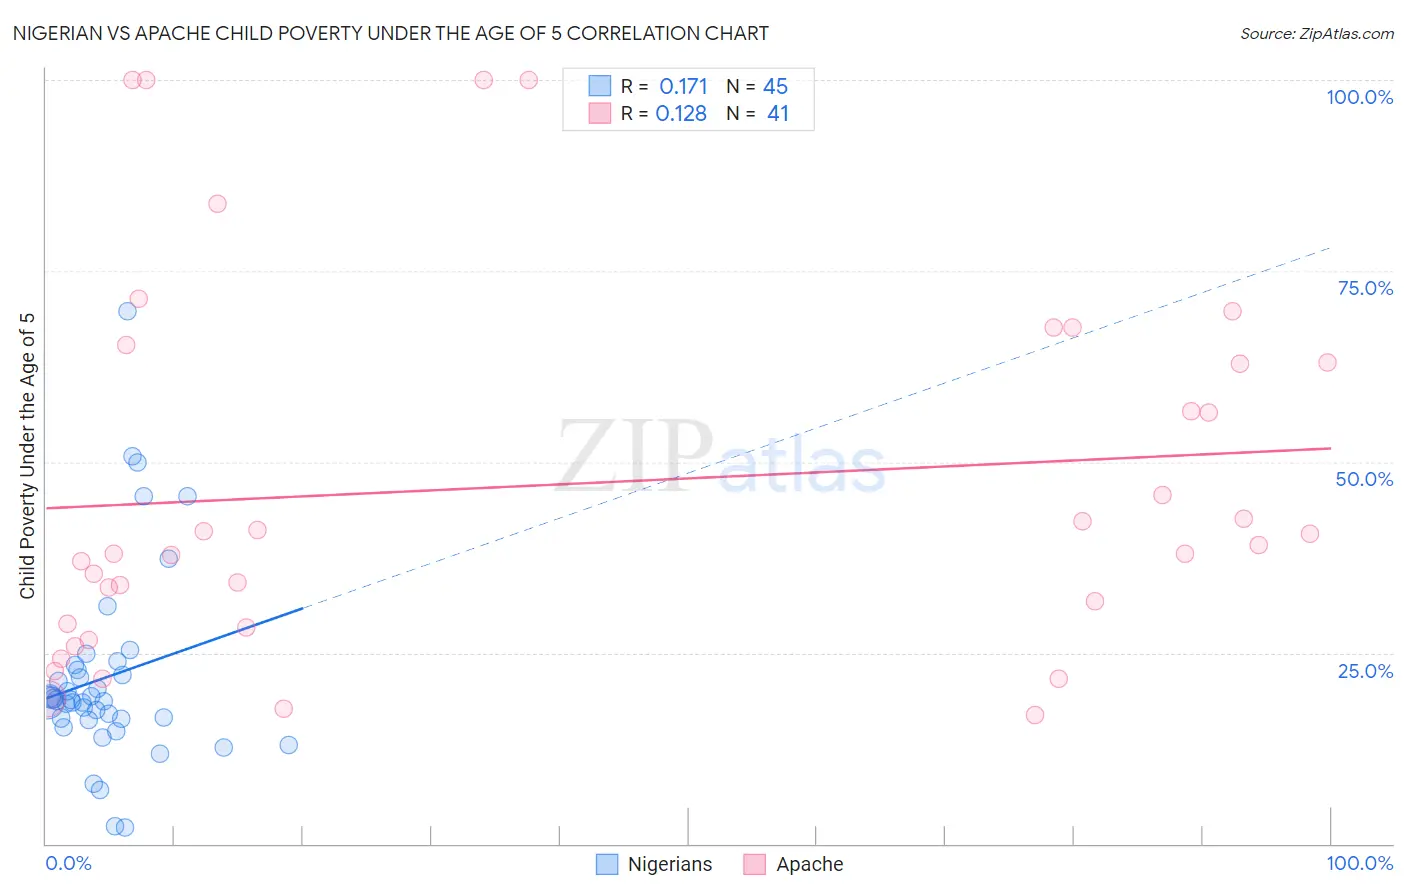 Nigerian vs Apache Child Poverty Under the Age of 5